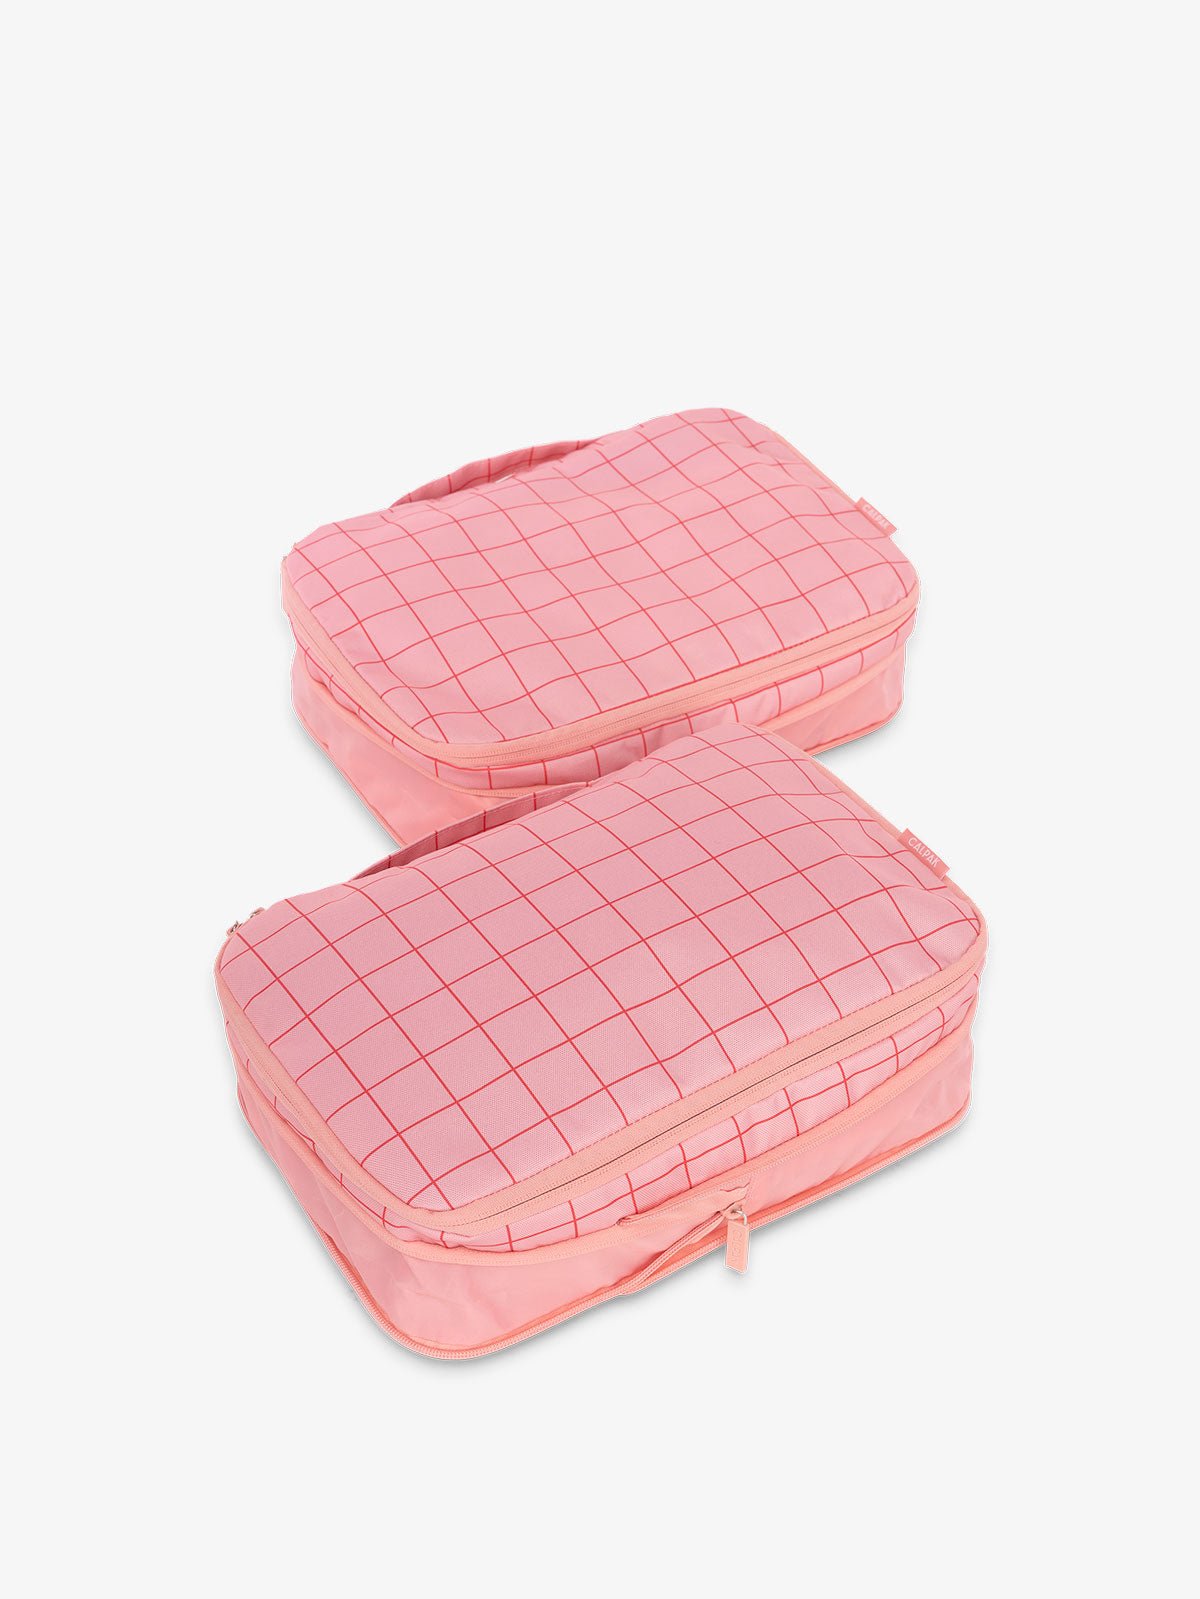 CALPAK compression packing cubes with handles in pink grid print